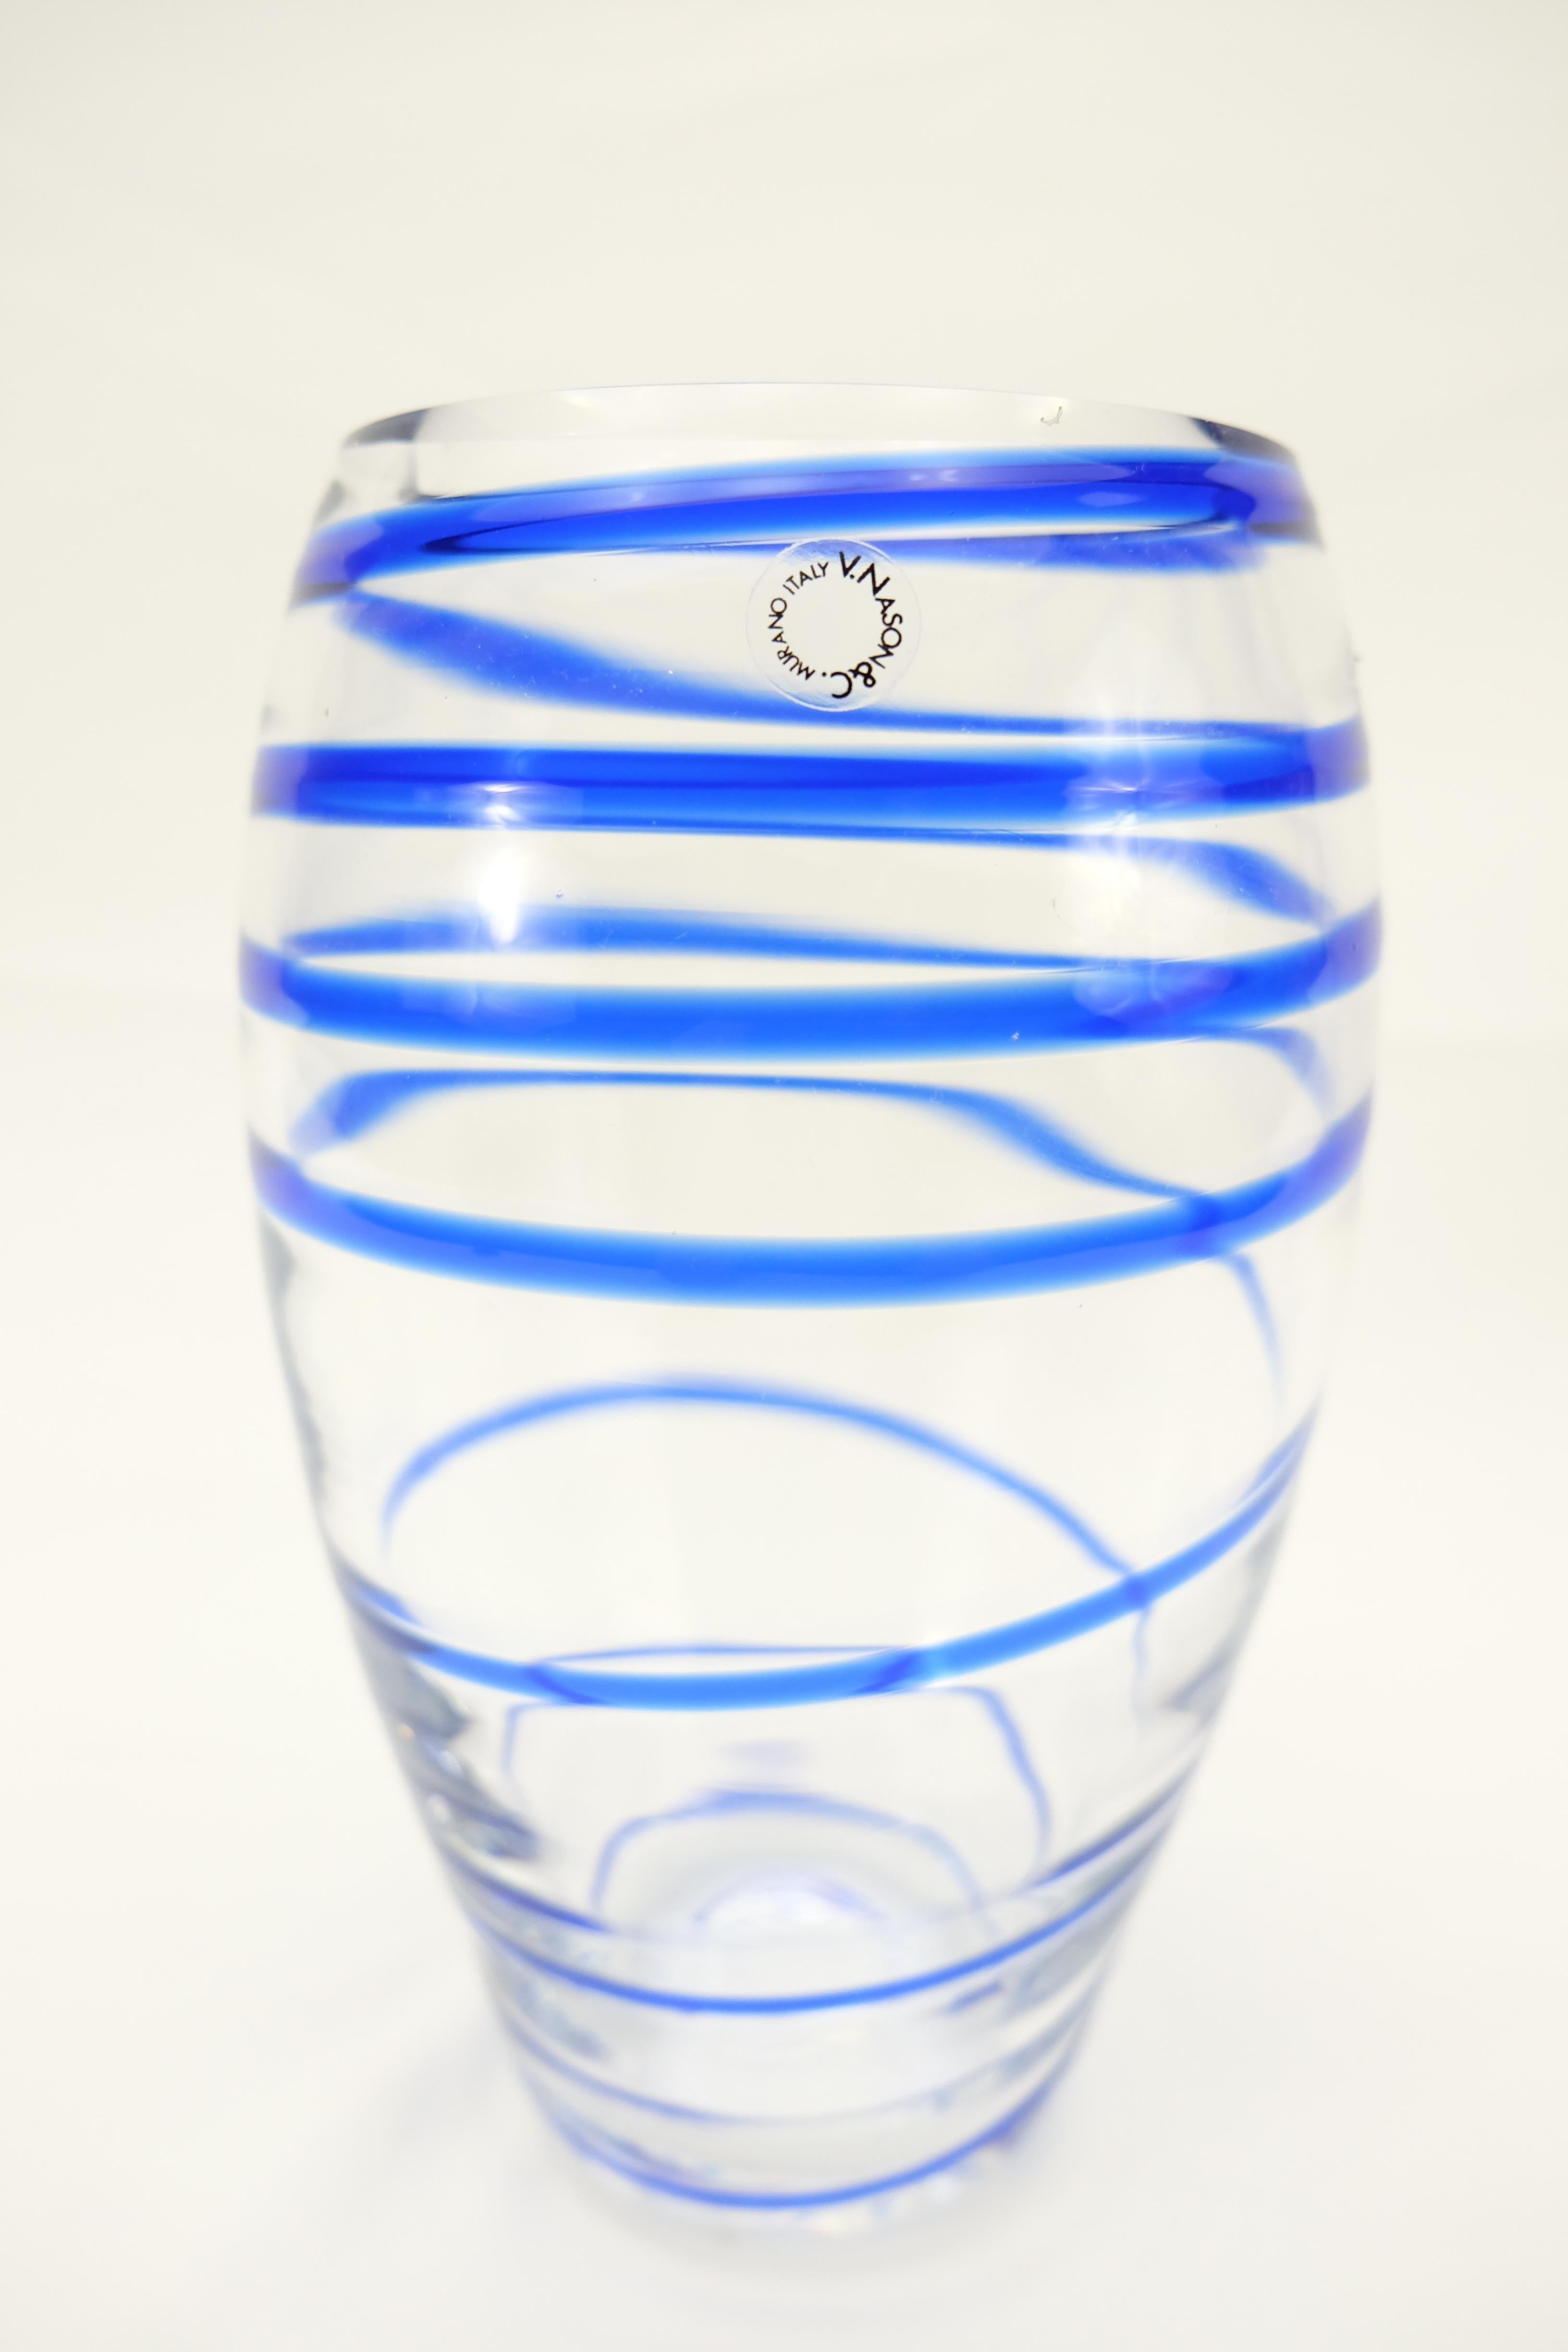 Offered for sale is an Italian blue spiral stripe Murano glass vase by V. Nason & C. This mouth-blown glass vase is created in a transparent and blue spiral color and retains the original sticker label from the maker. Vincenzo Nason established his